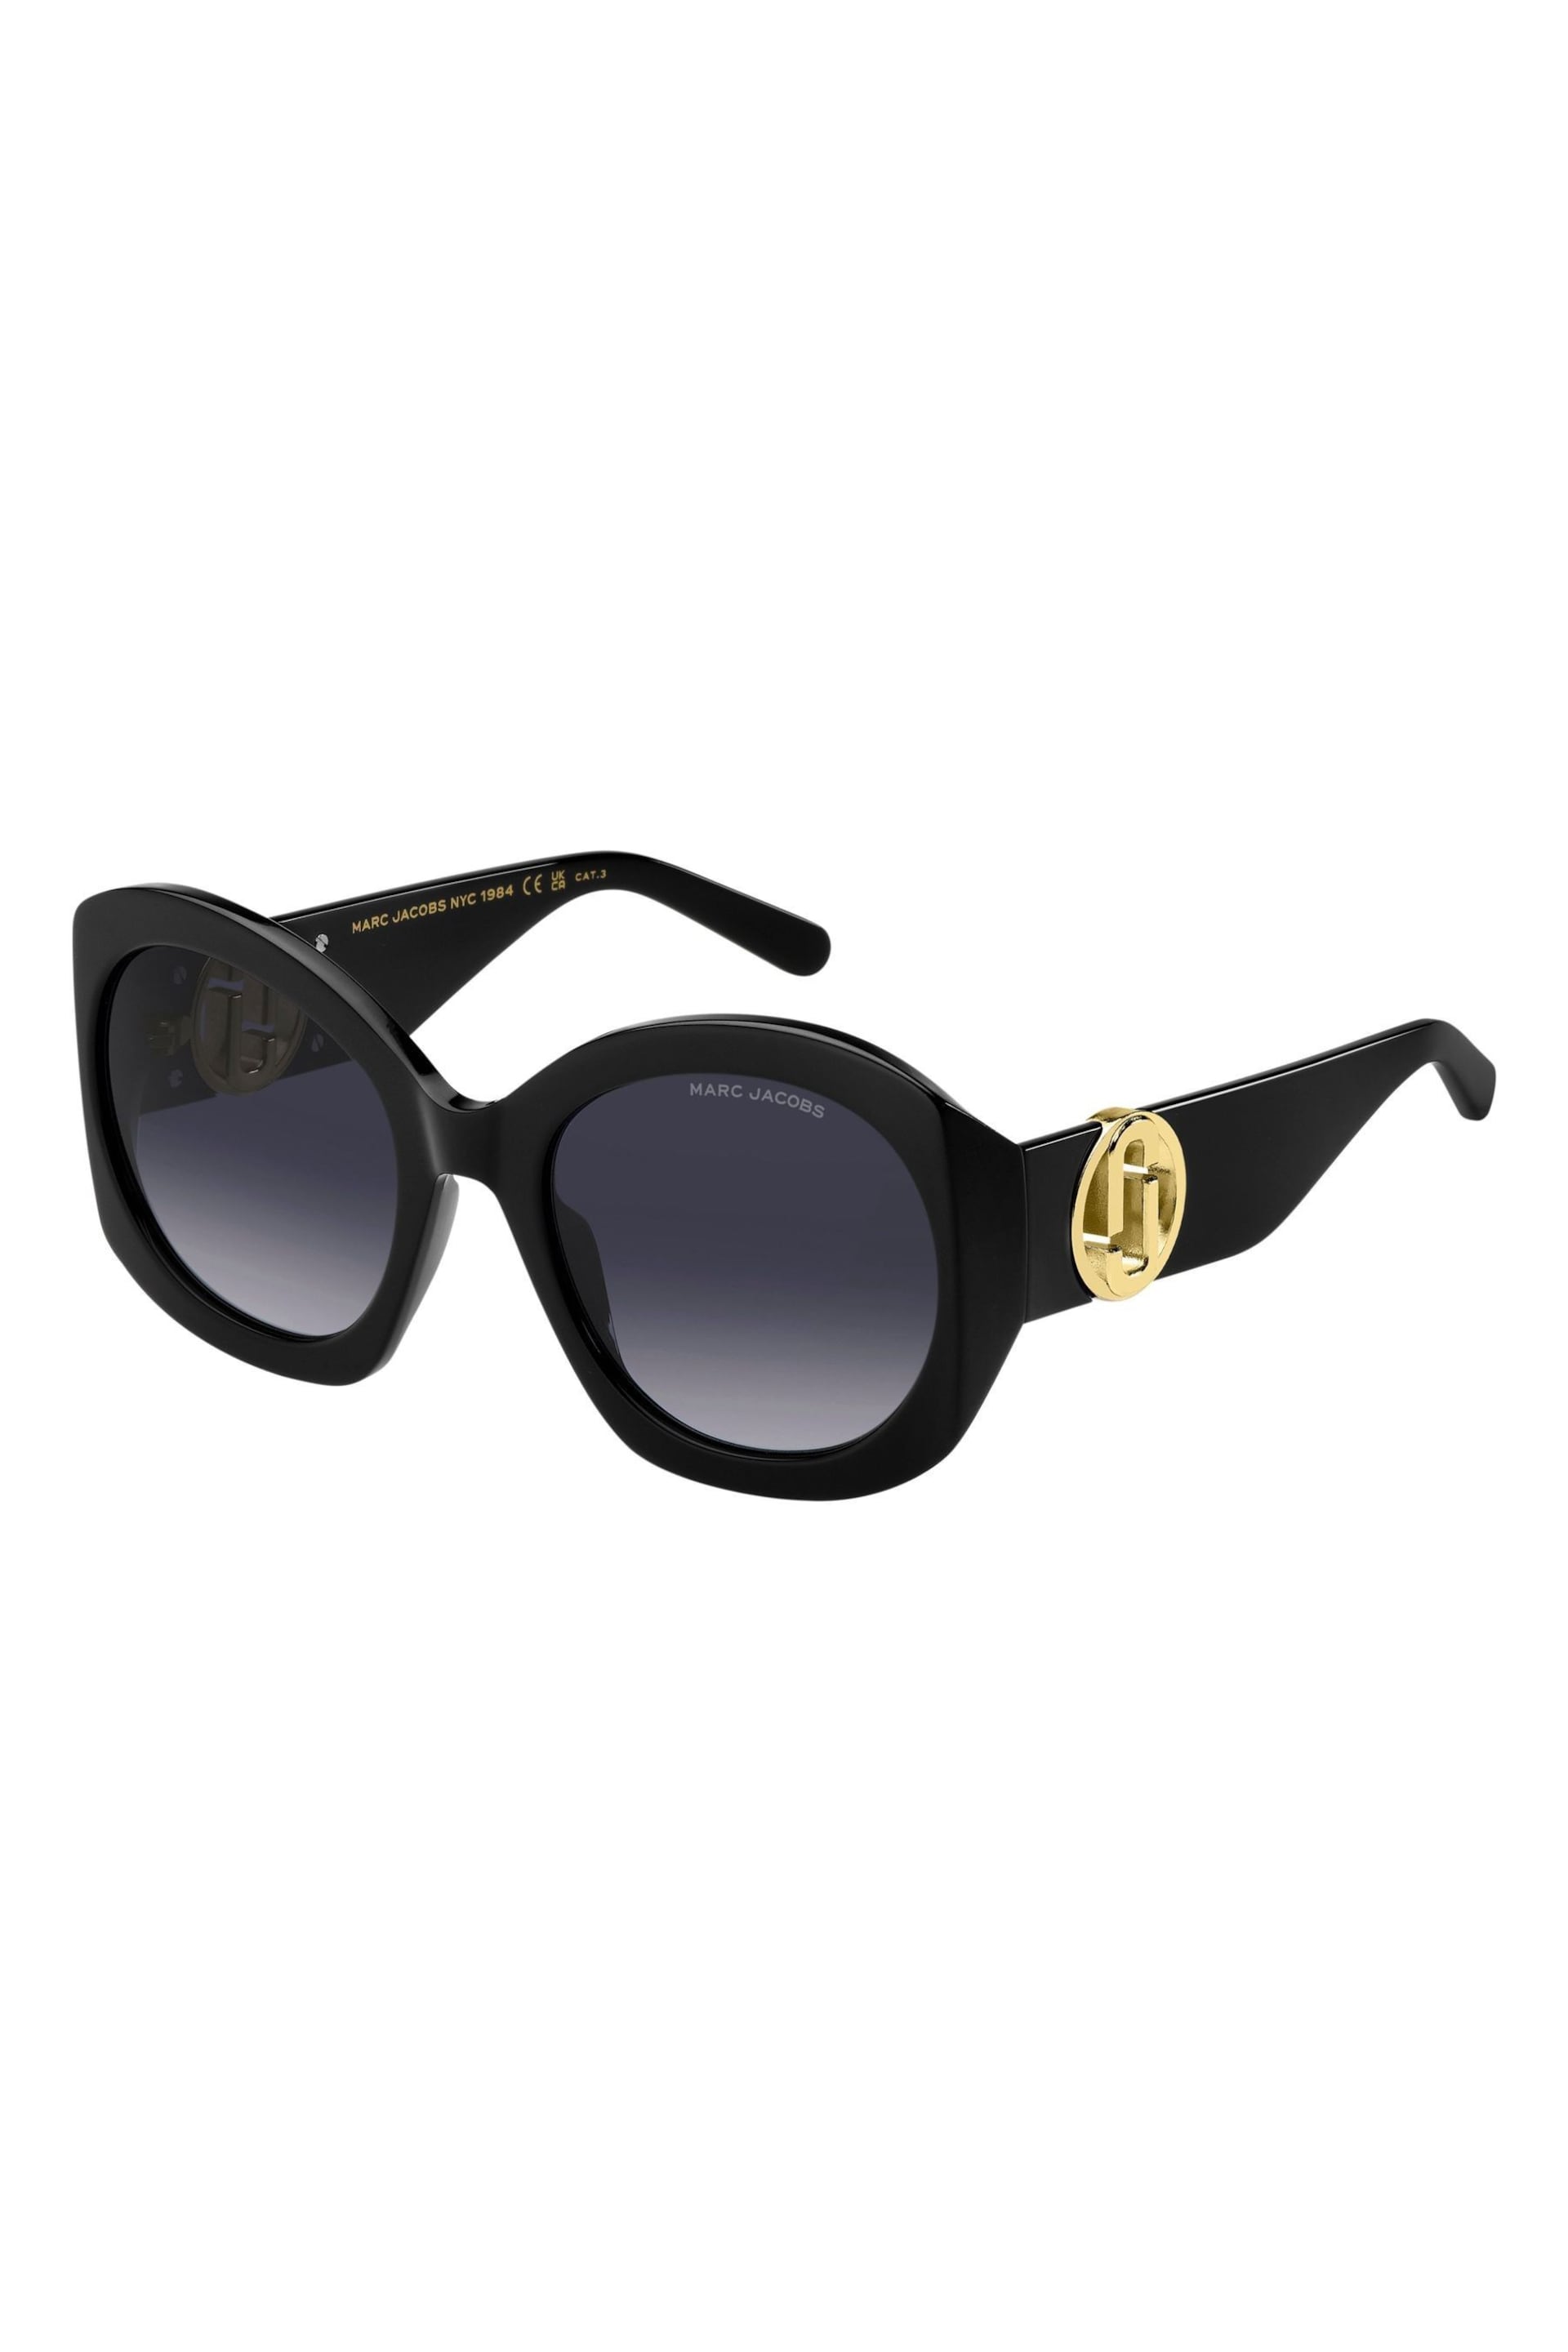 Marc Jacobs 722/S Butterfly Black Sunglasses - Image 3 of 4